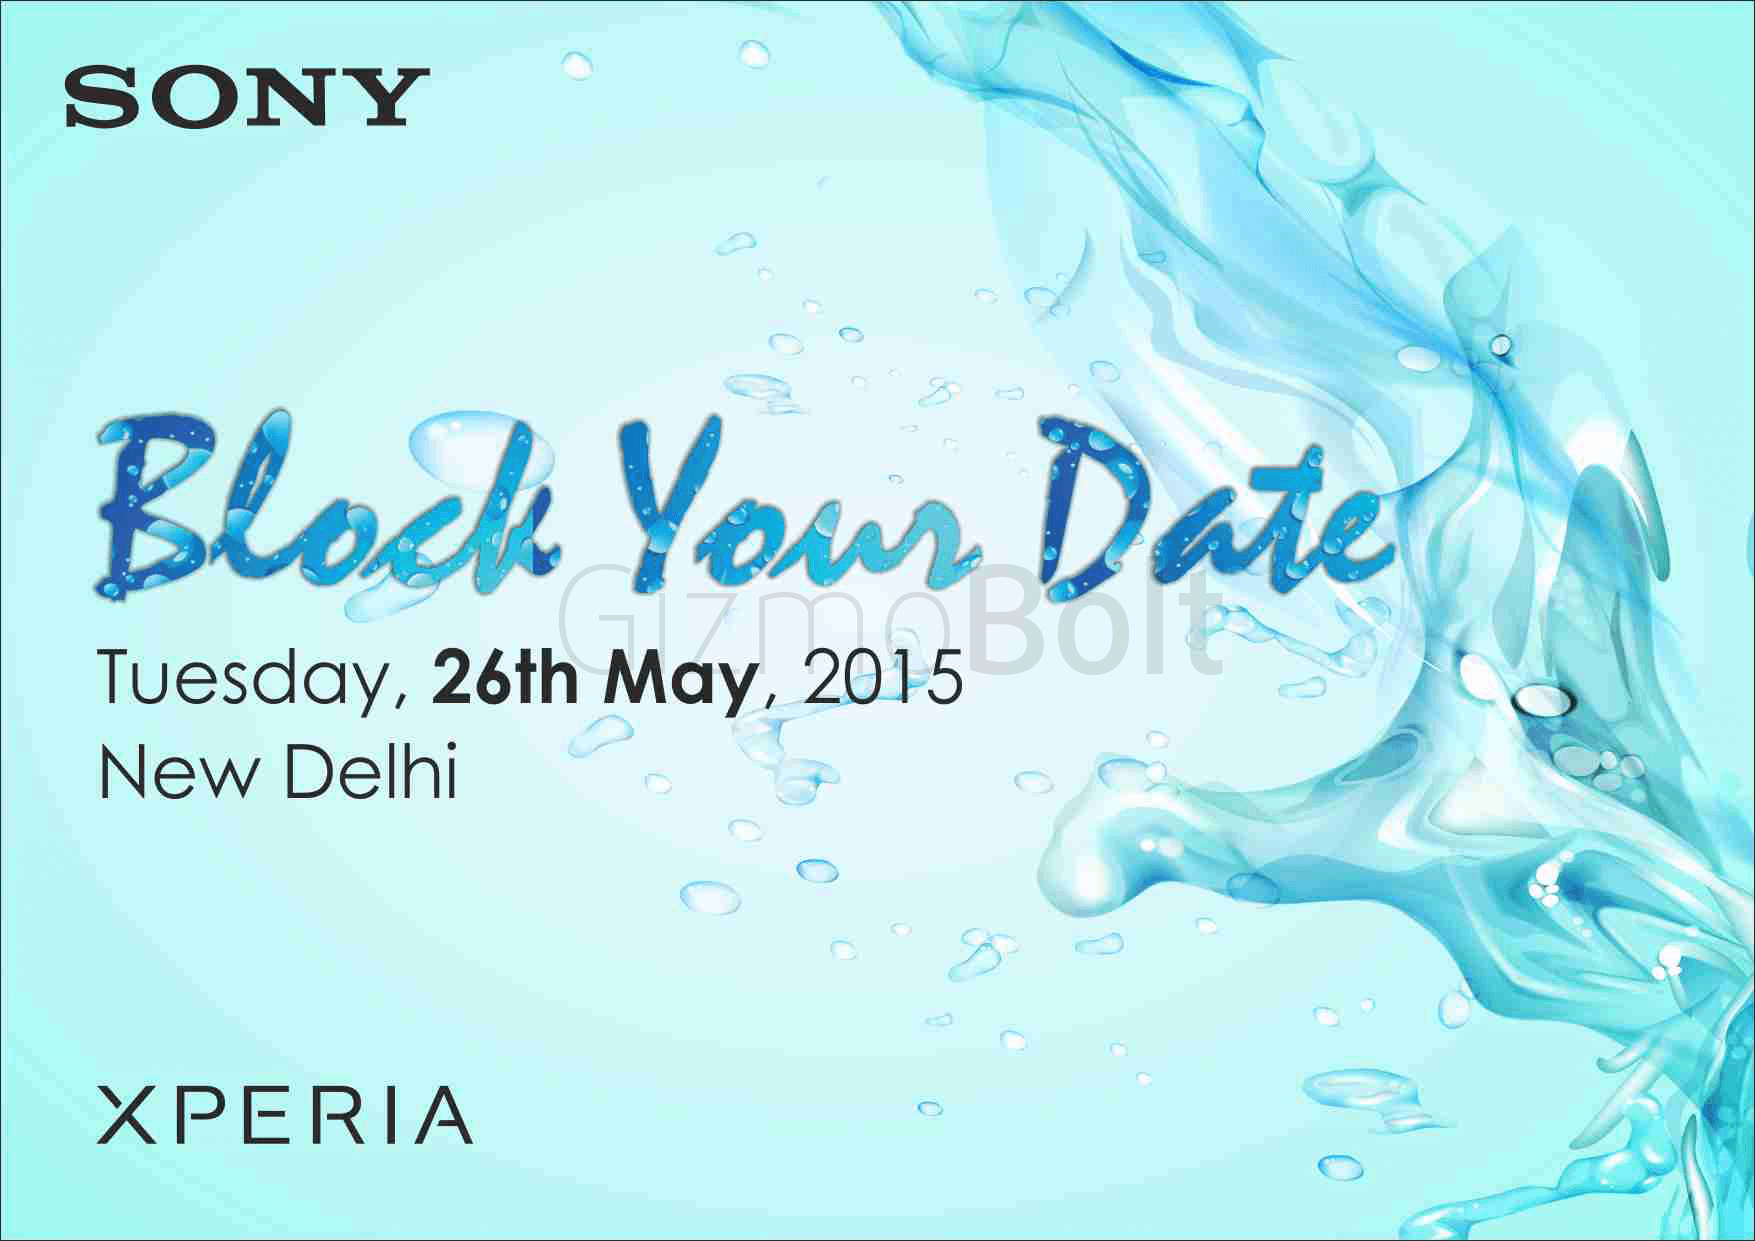 Sony Press Event in India on 26 May